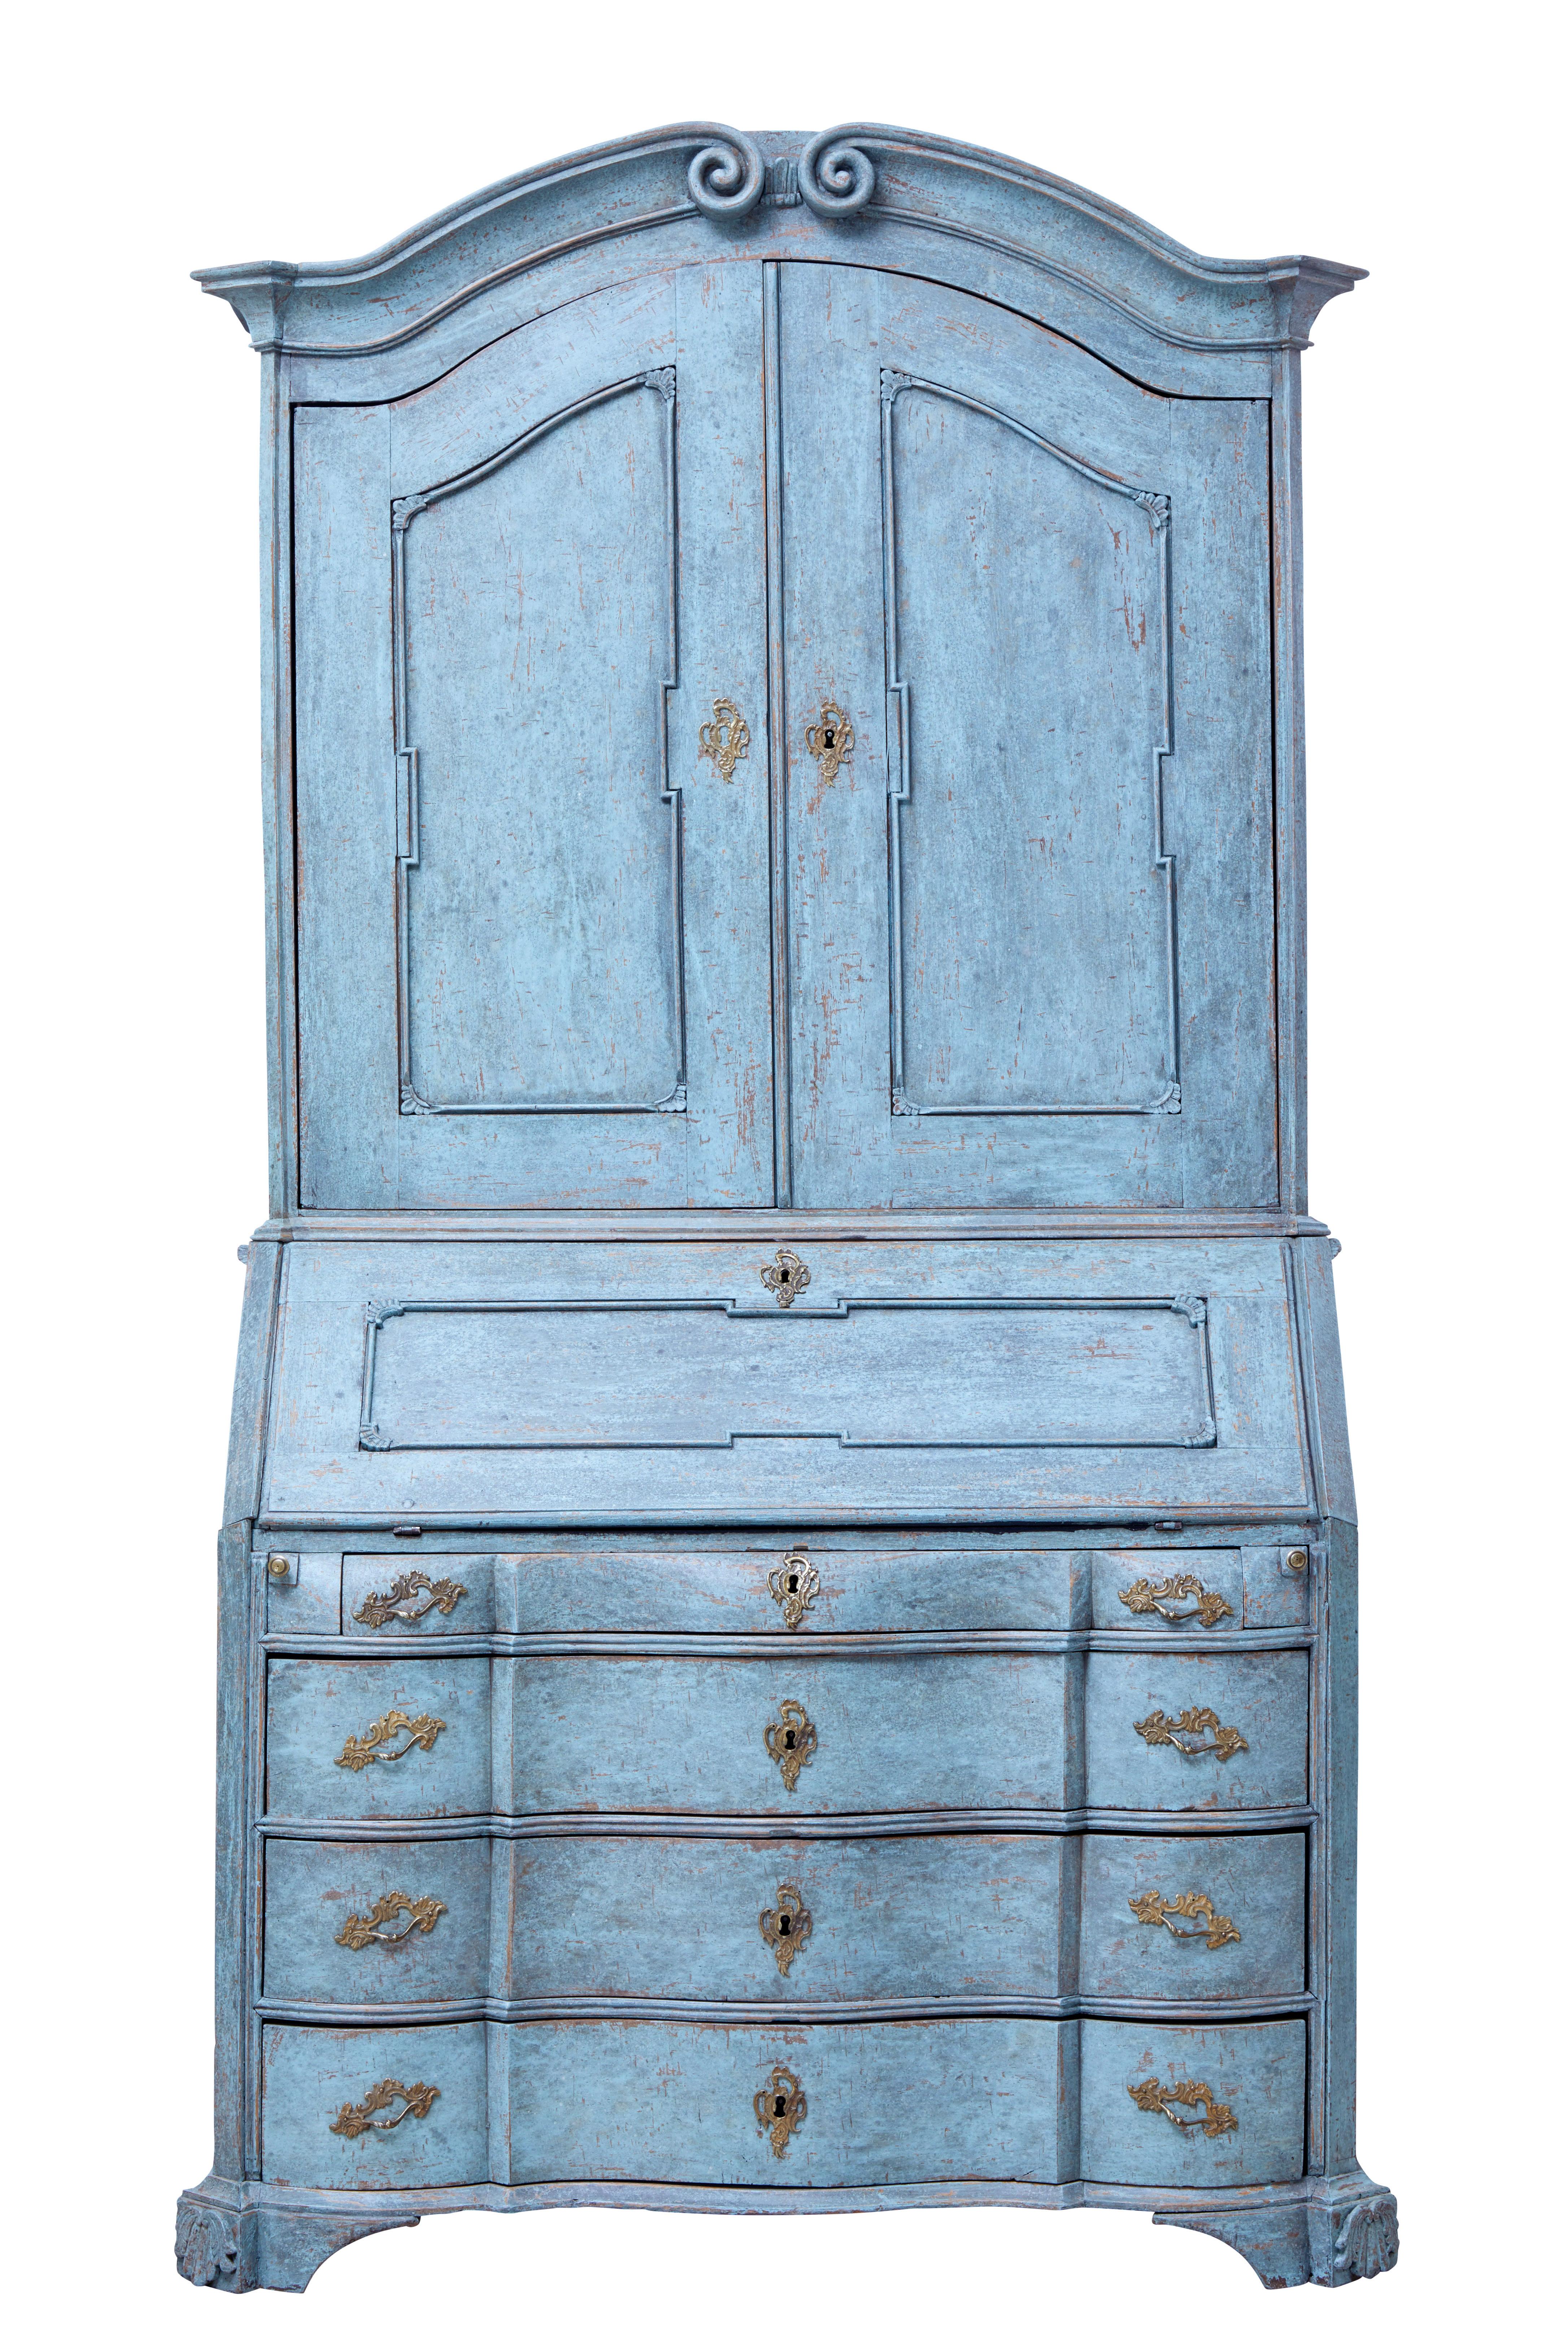 Stunning baroque swedish painted bureau bookcase circa 1780.

Comprising of 2 parts. Top section with a beautiful deep scrolling cornice, below which the double doors open to 3 shelves. Bottom section with moulded bureau front, fall opens to